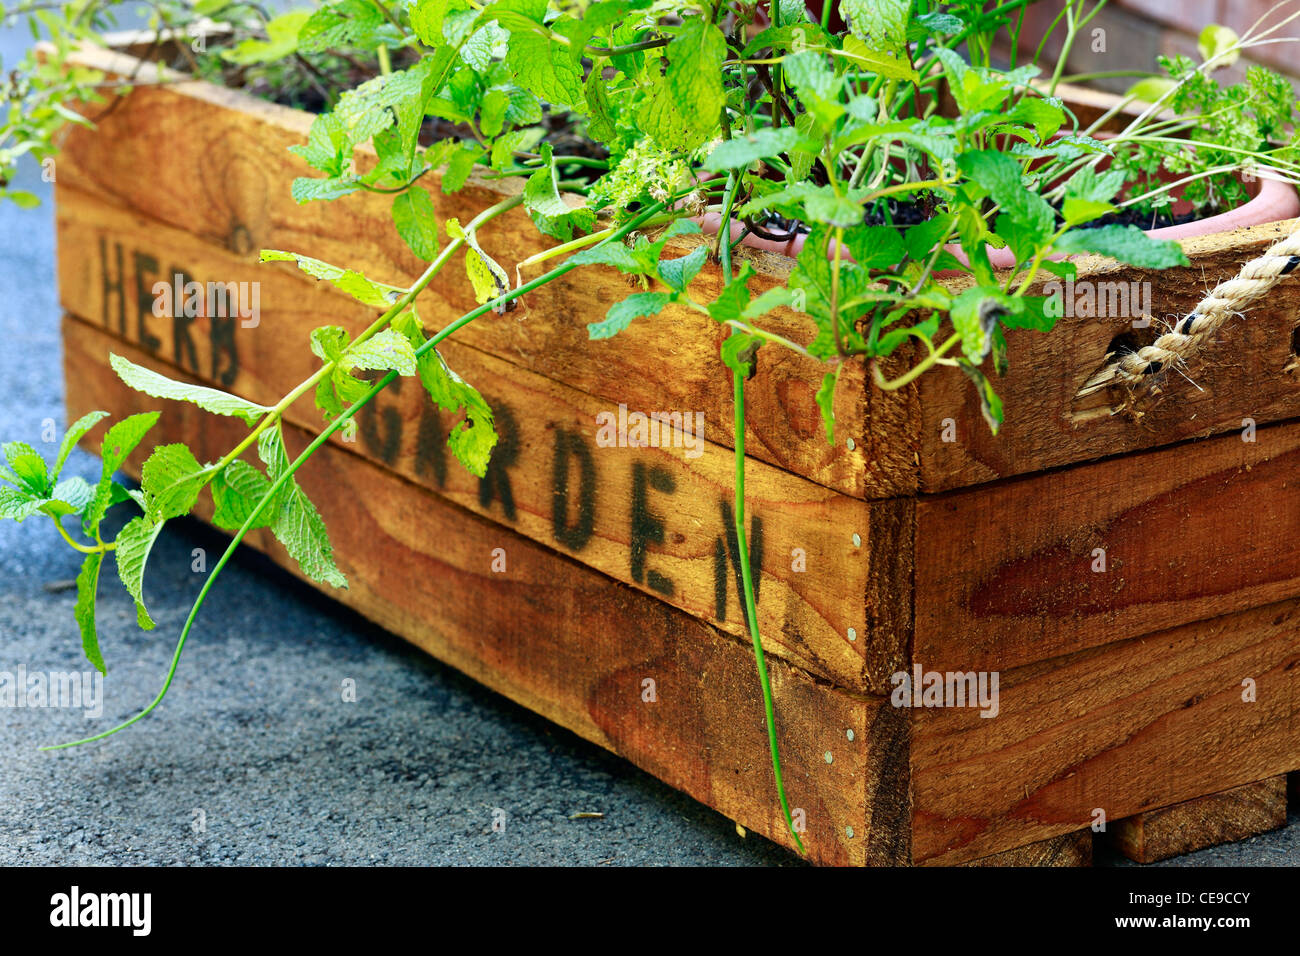 Herb garden. Rustic wooden crate for potted herbs. Stock Photo